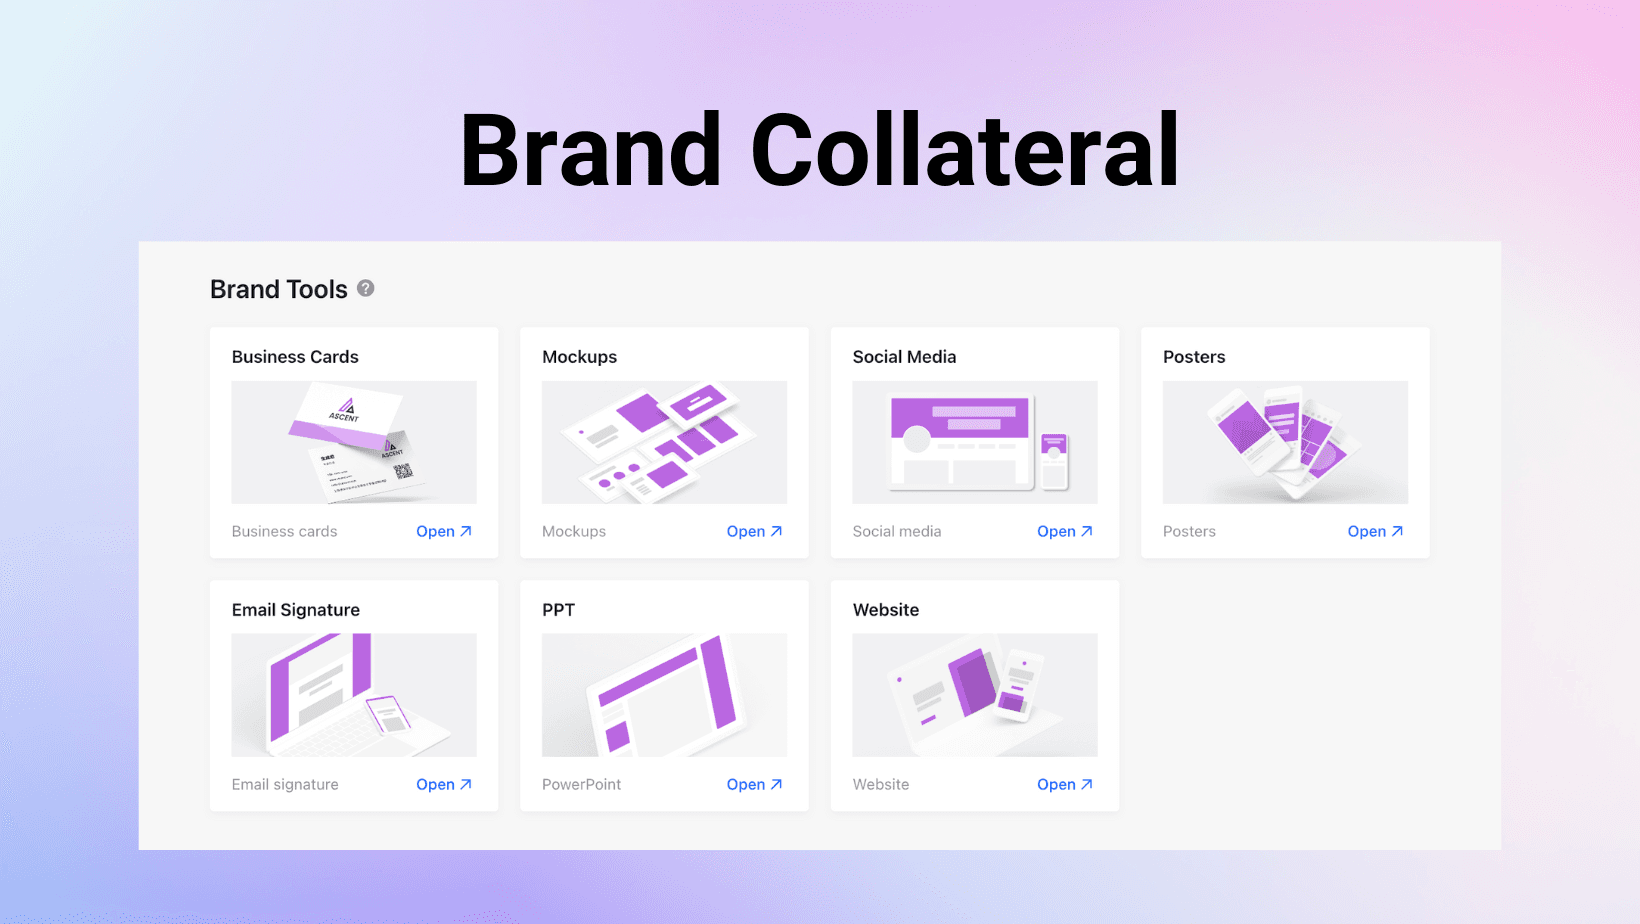 7 Types of Brand Collaterals You Can Generate Automatically With AI